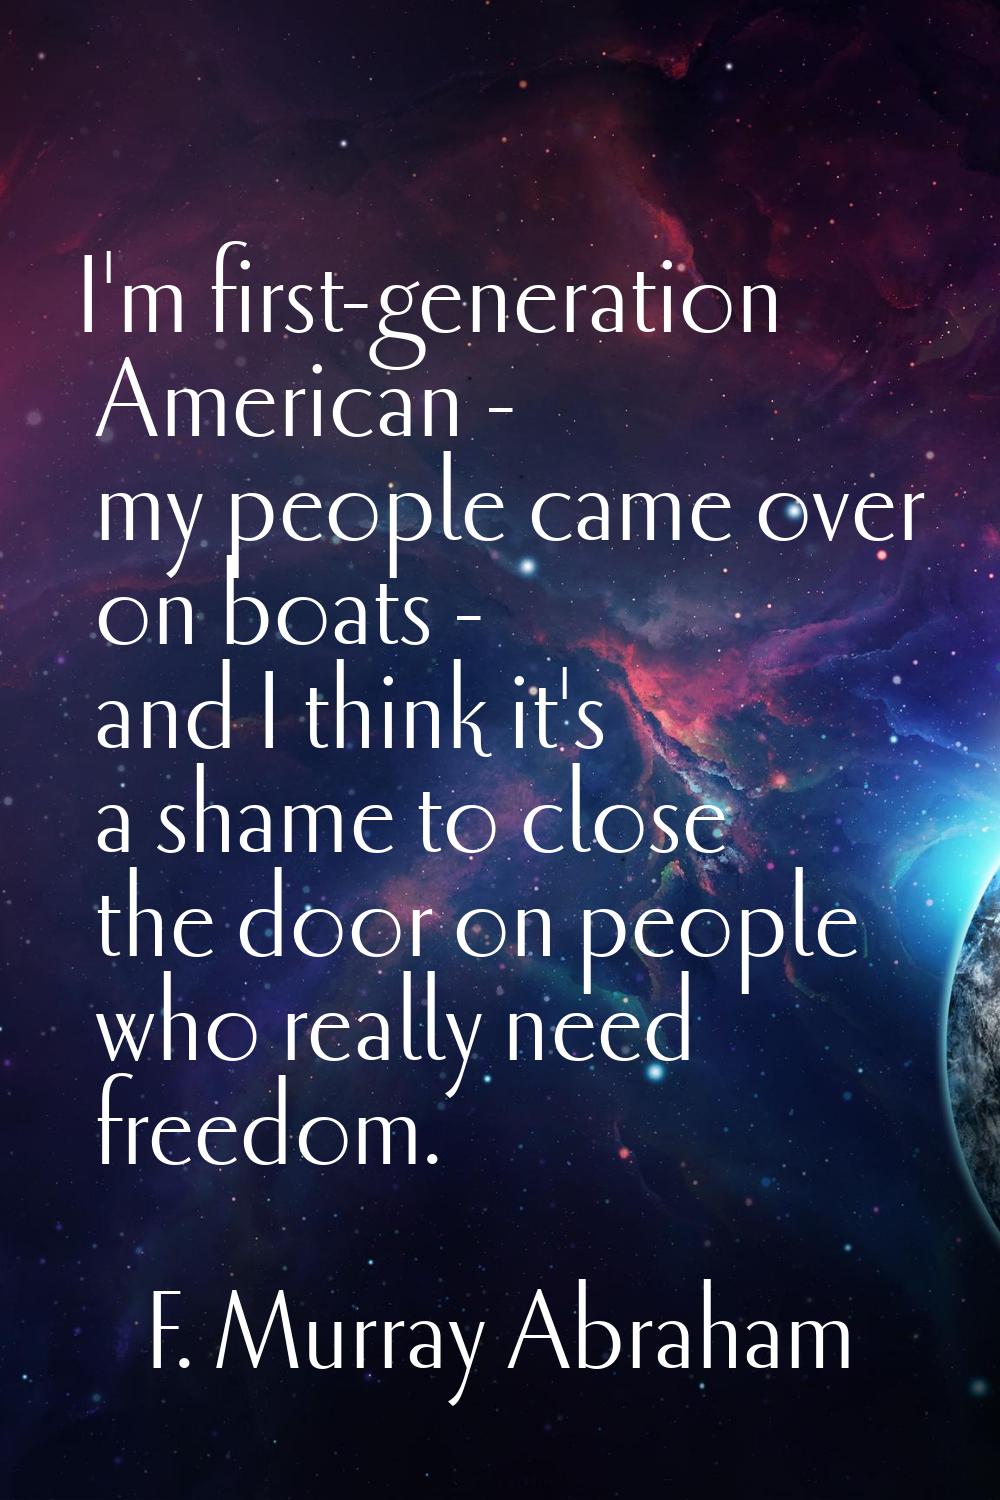 I'm first-generation American - my people came over on boats - and I think it's a shame to close th